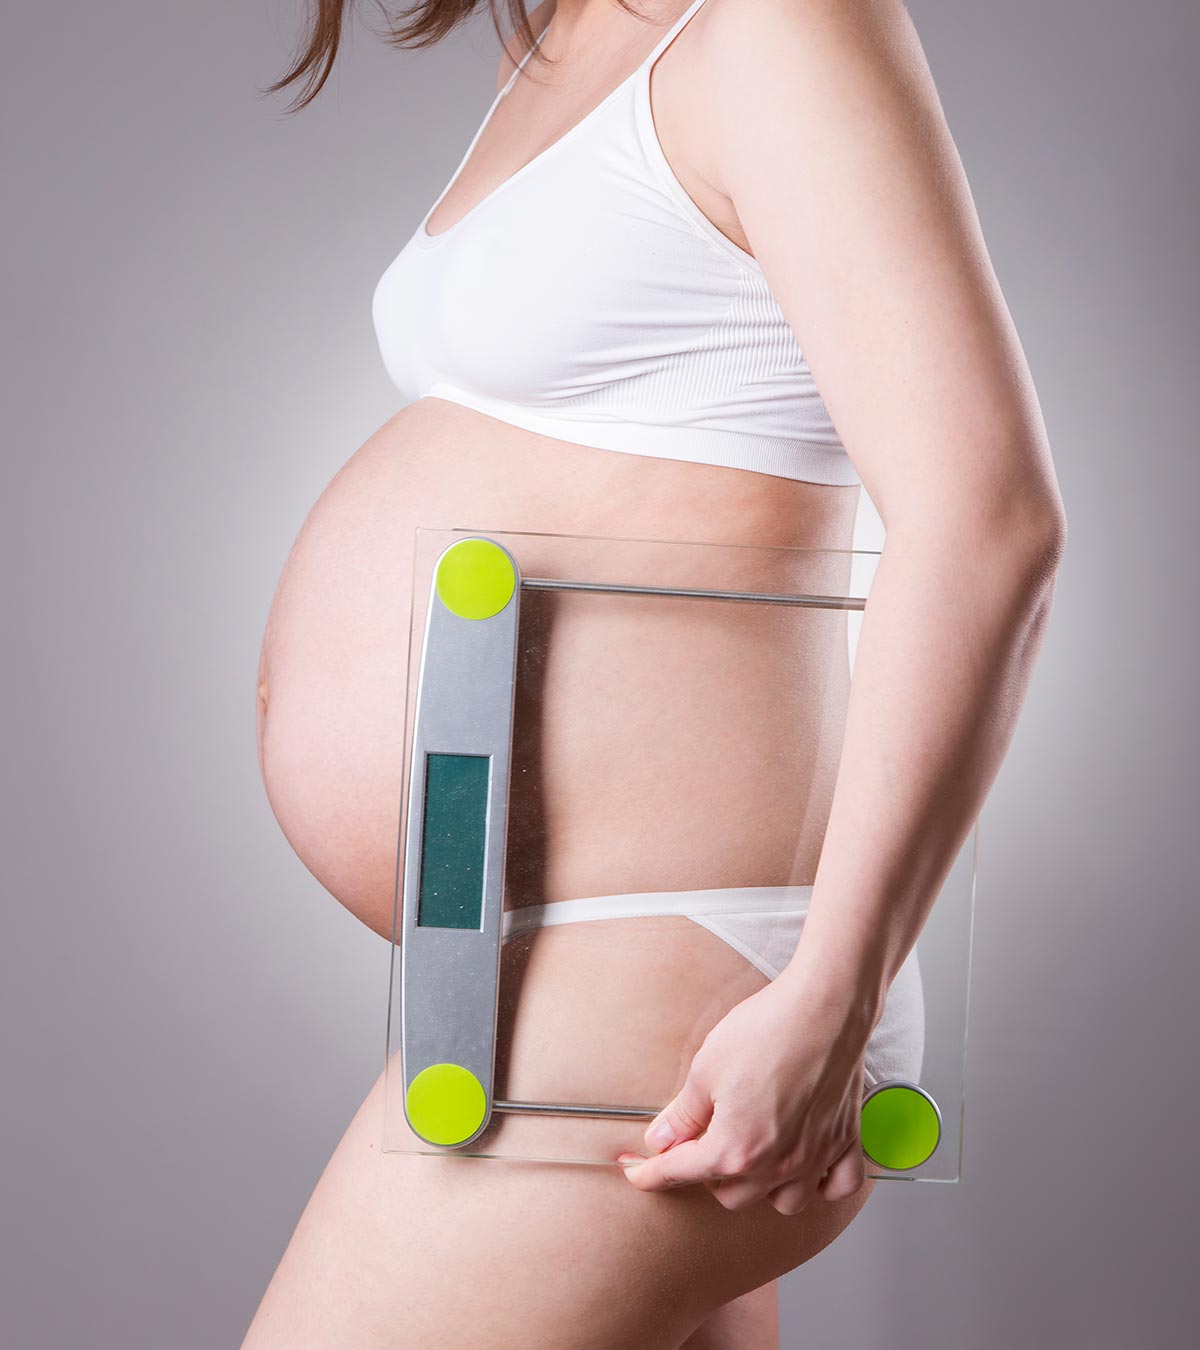 7 Safe Ways To Lose Weight While Pregnant